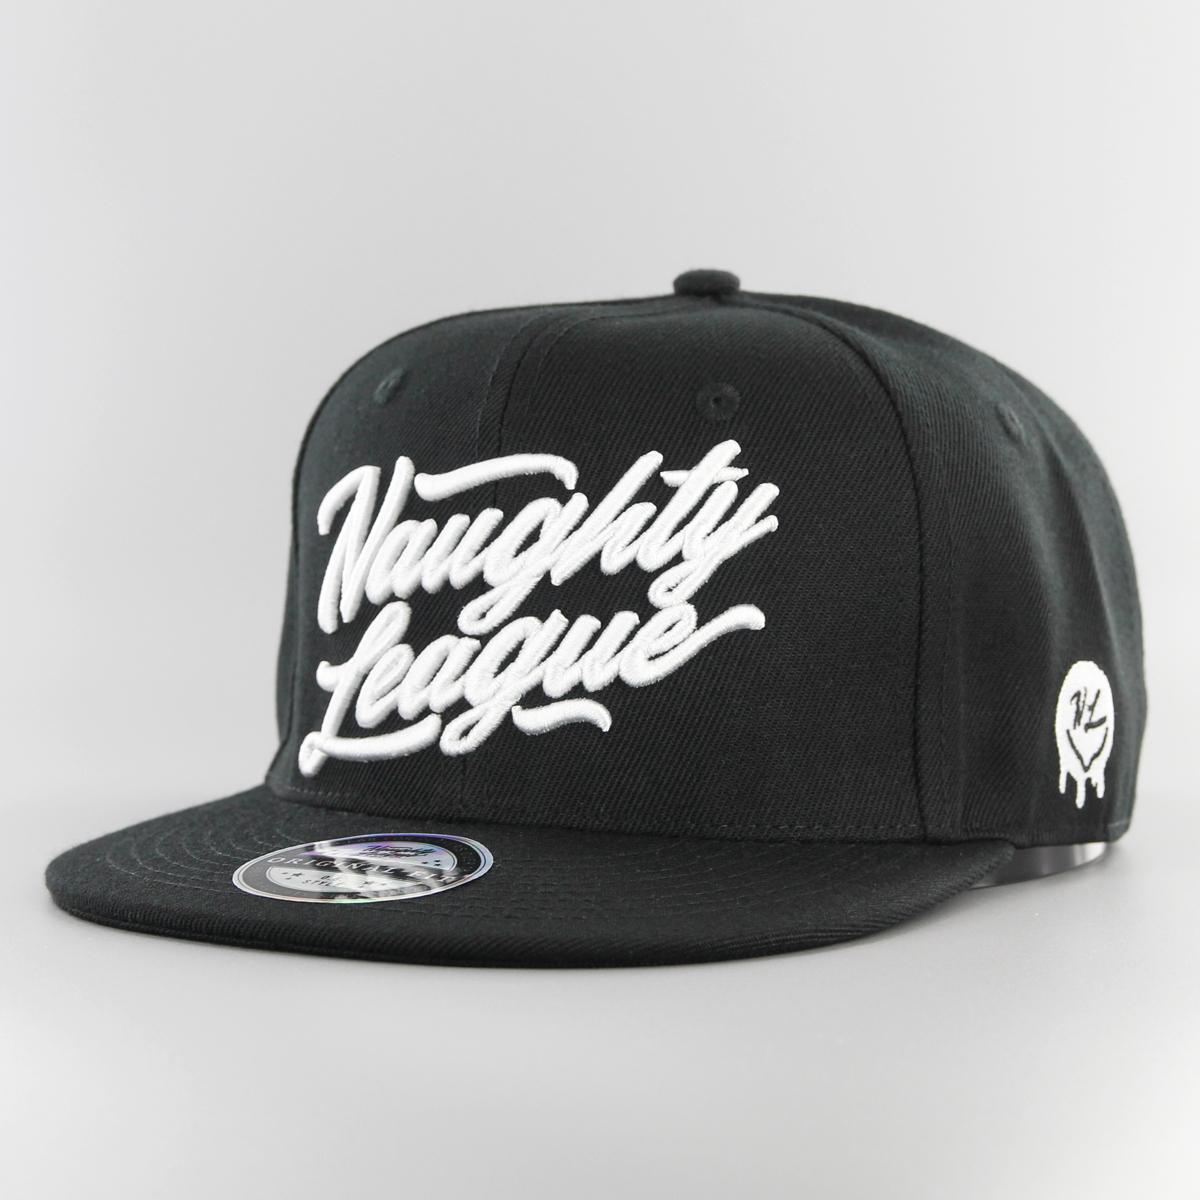 Naughty League Branded fitted black/white - Shop-Tetuan